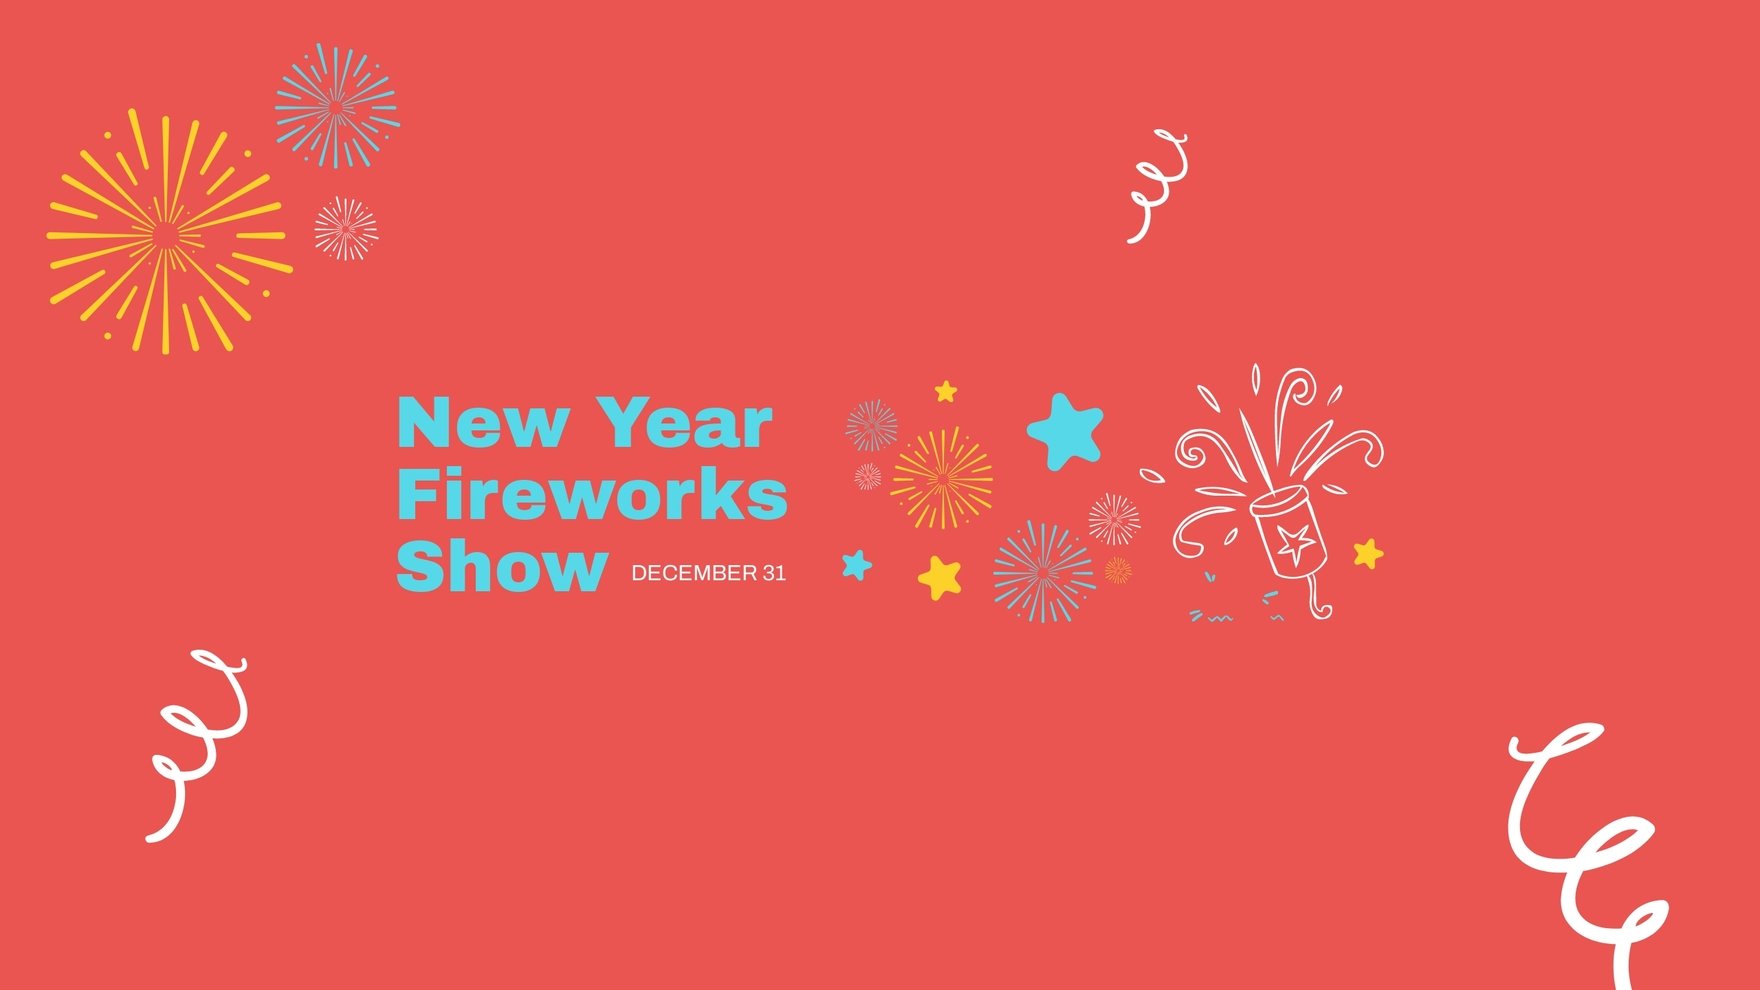 New Year Fireworks Show Youtube Banner